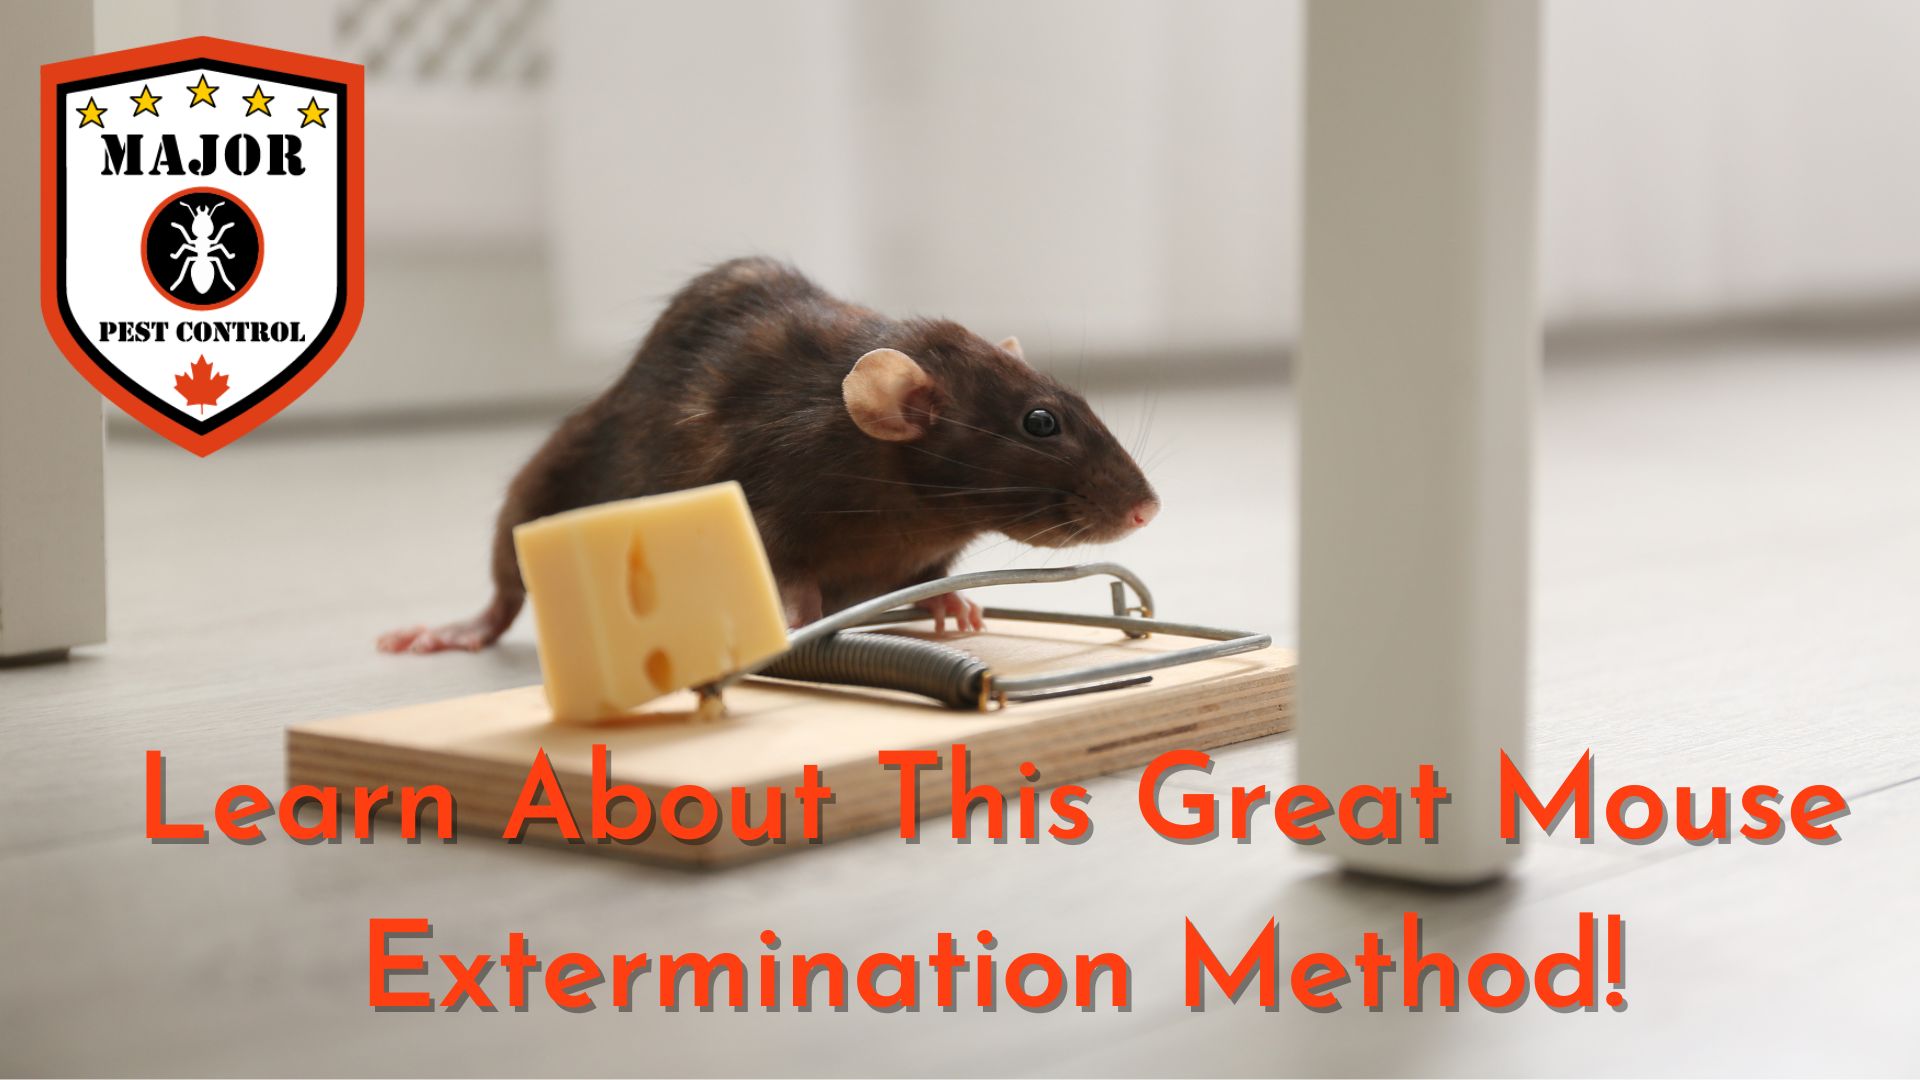 Great Mouse Extermination Method